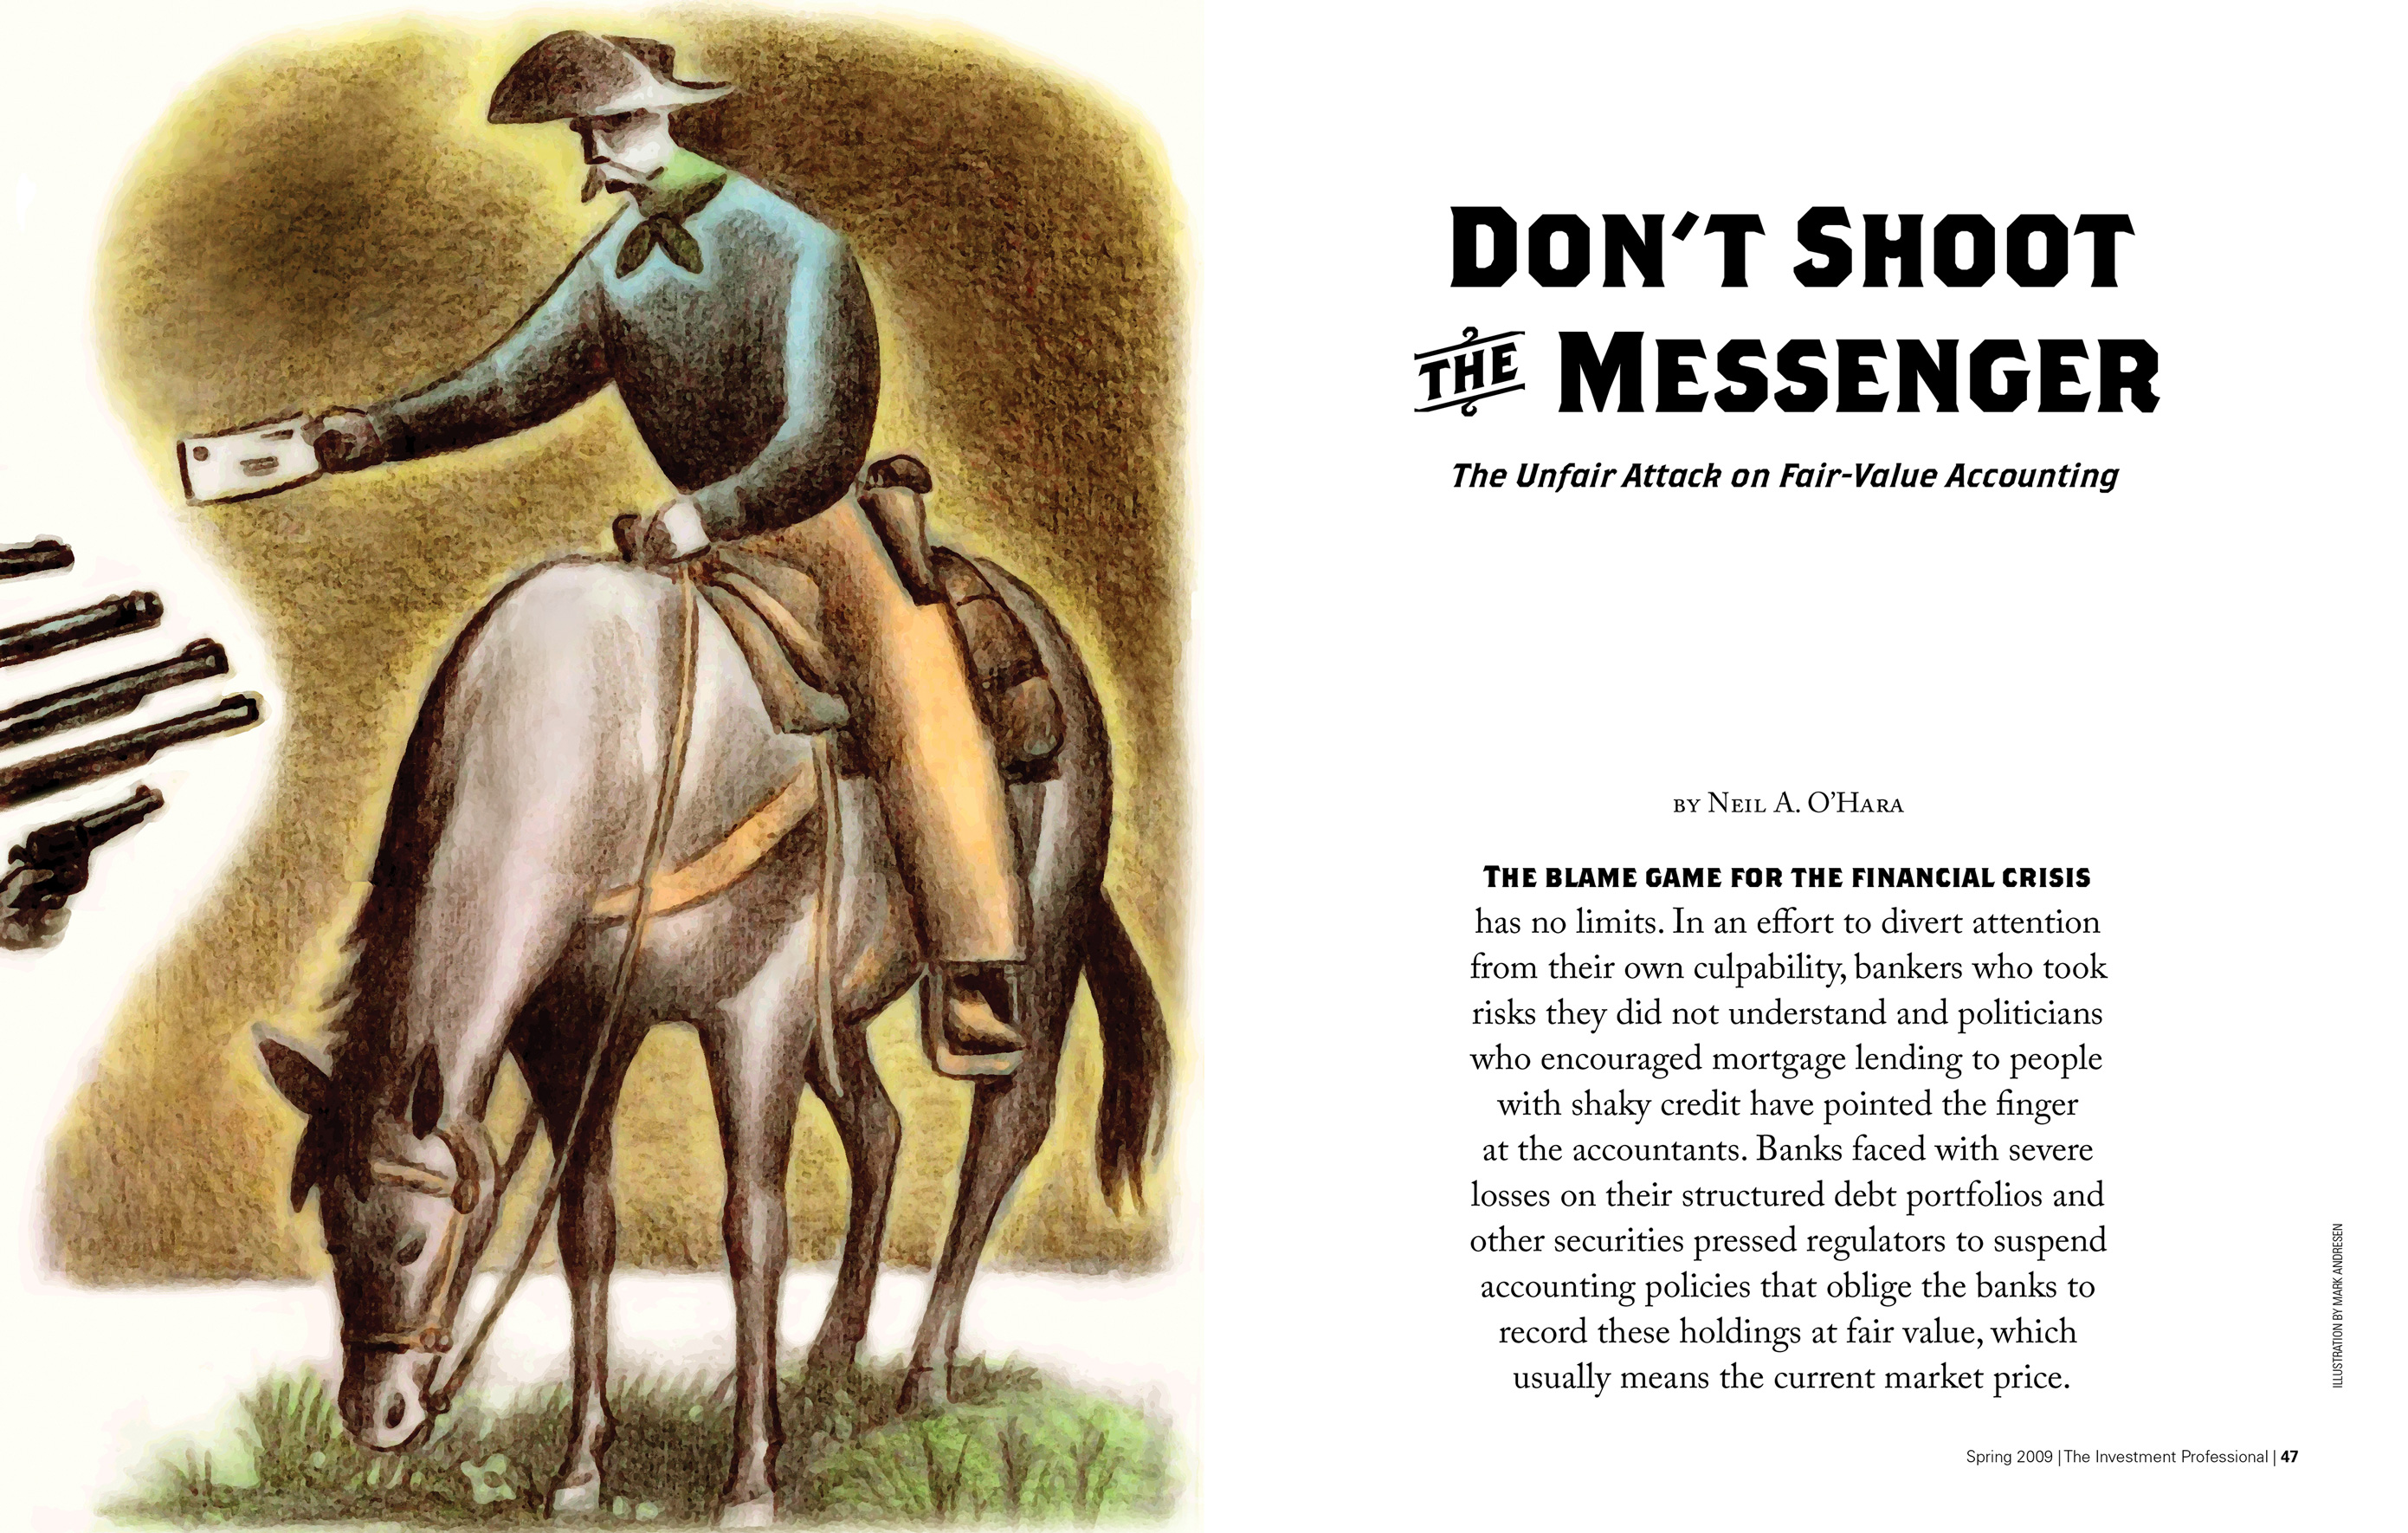 Opening spread of a feature article in The Investment Professional magazine, titled 'Don’t Shoot the Messenger: The Unfair Attack on Fair-Value Accounting.' In a full-page illustration, a cowboy sits on a horse and holds out a piece of mail. Four rifles and a pistol are aimed at him from the left edge of the image.